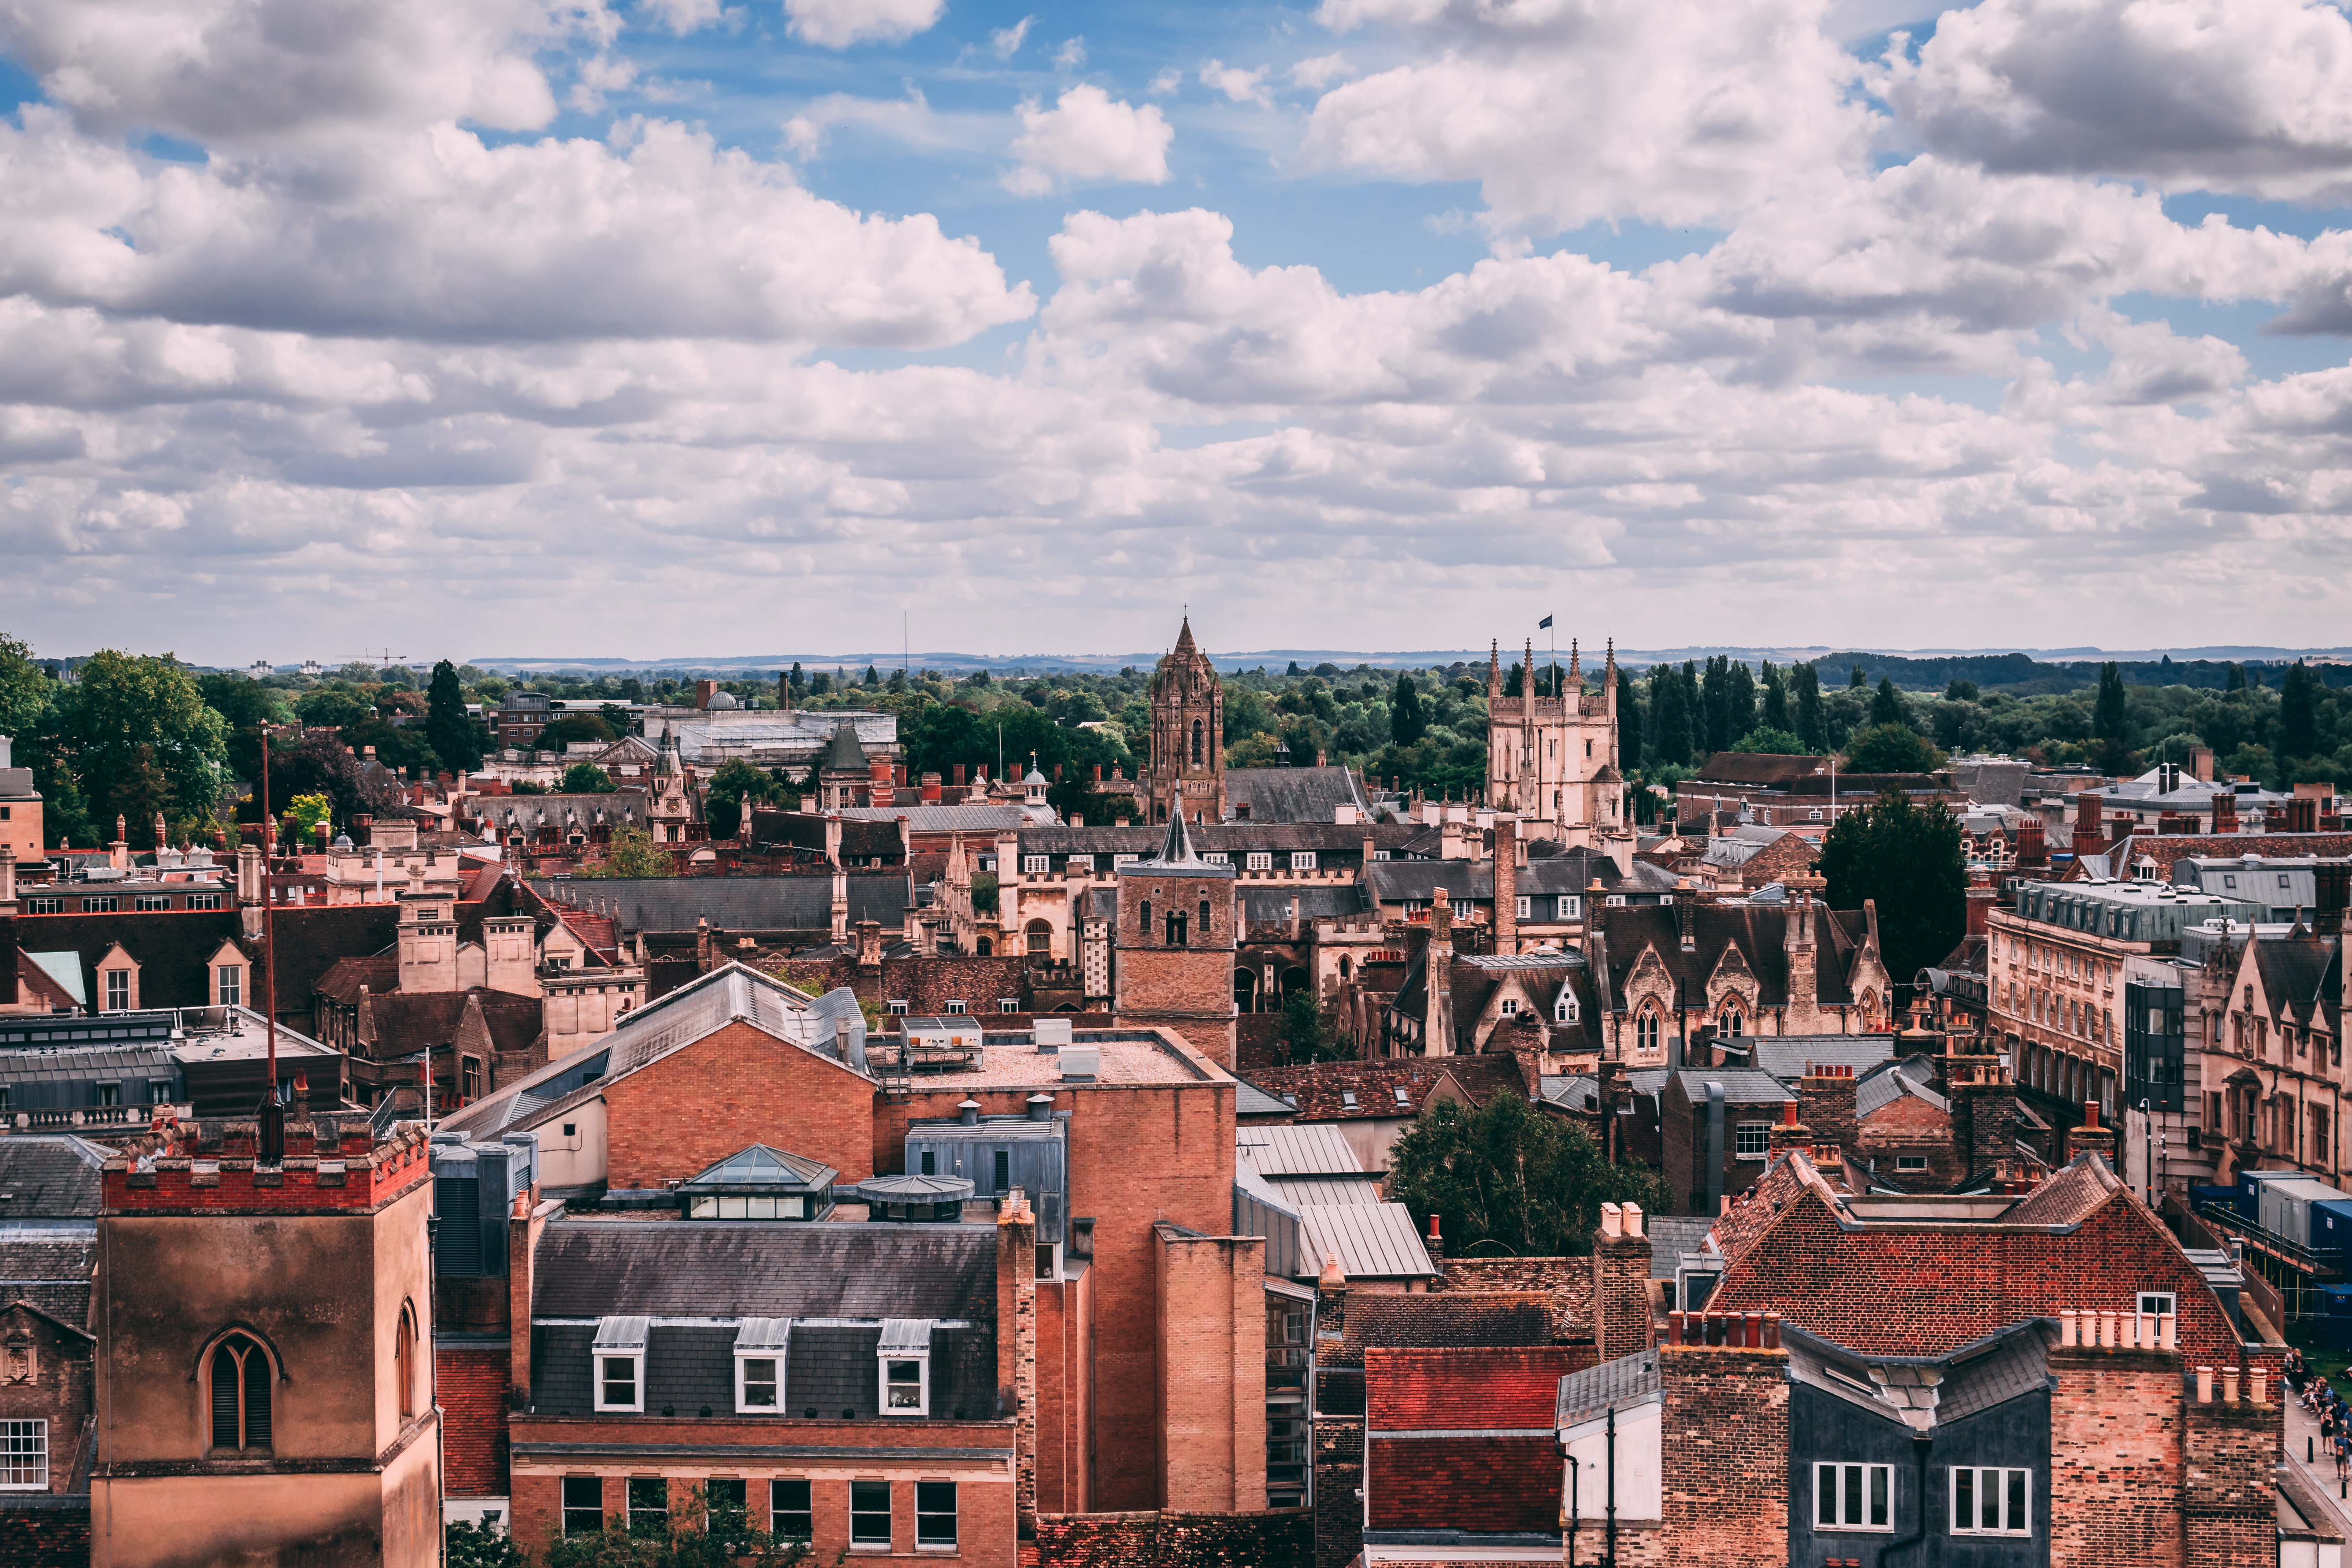 The buildings of Cambridge stretch out into the distance, on a cloudy day